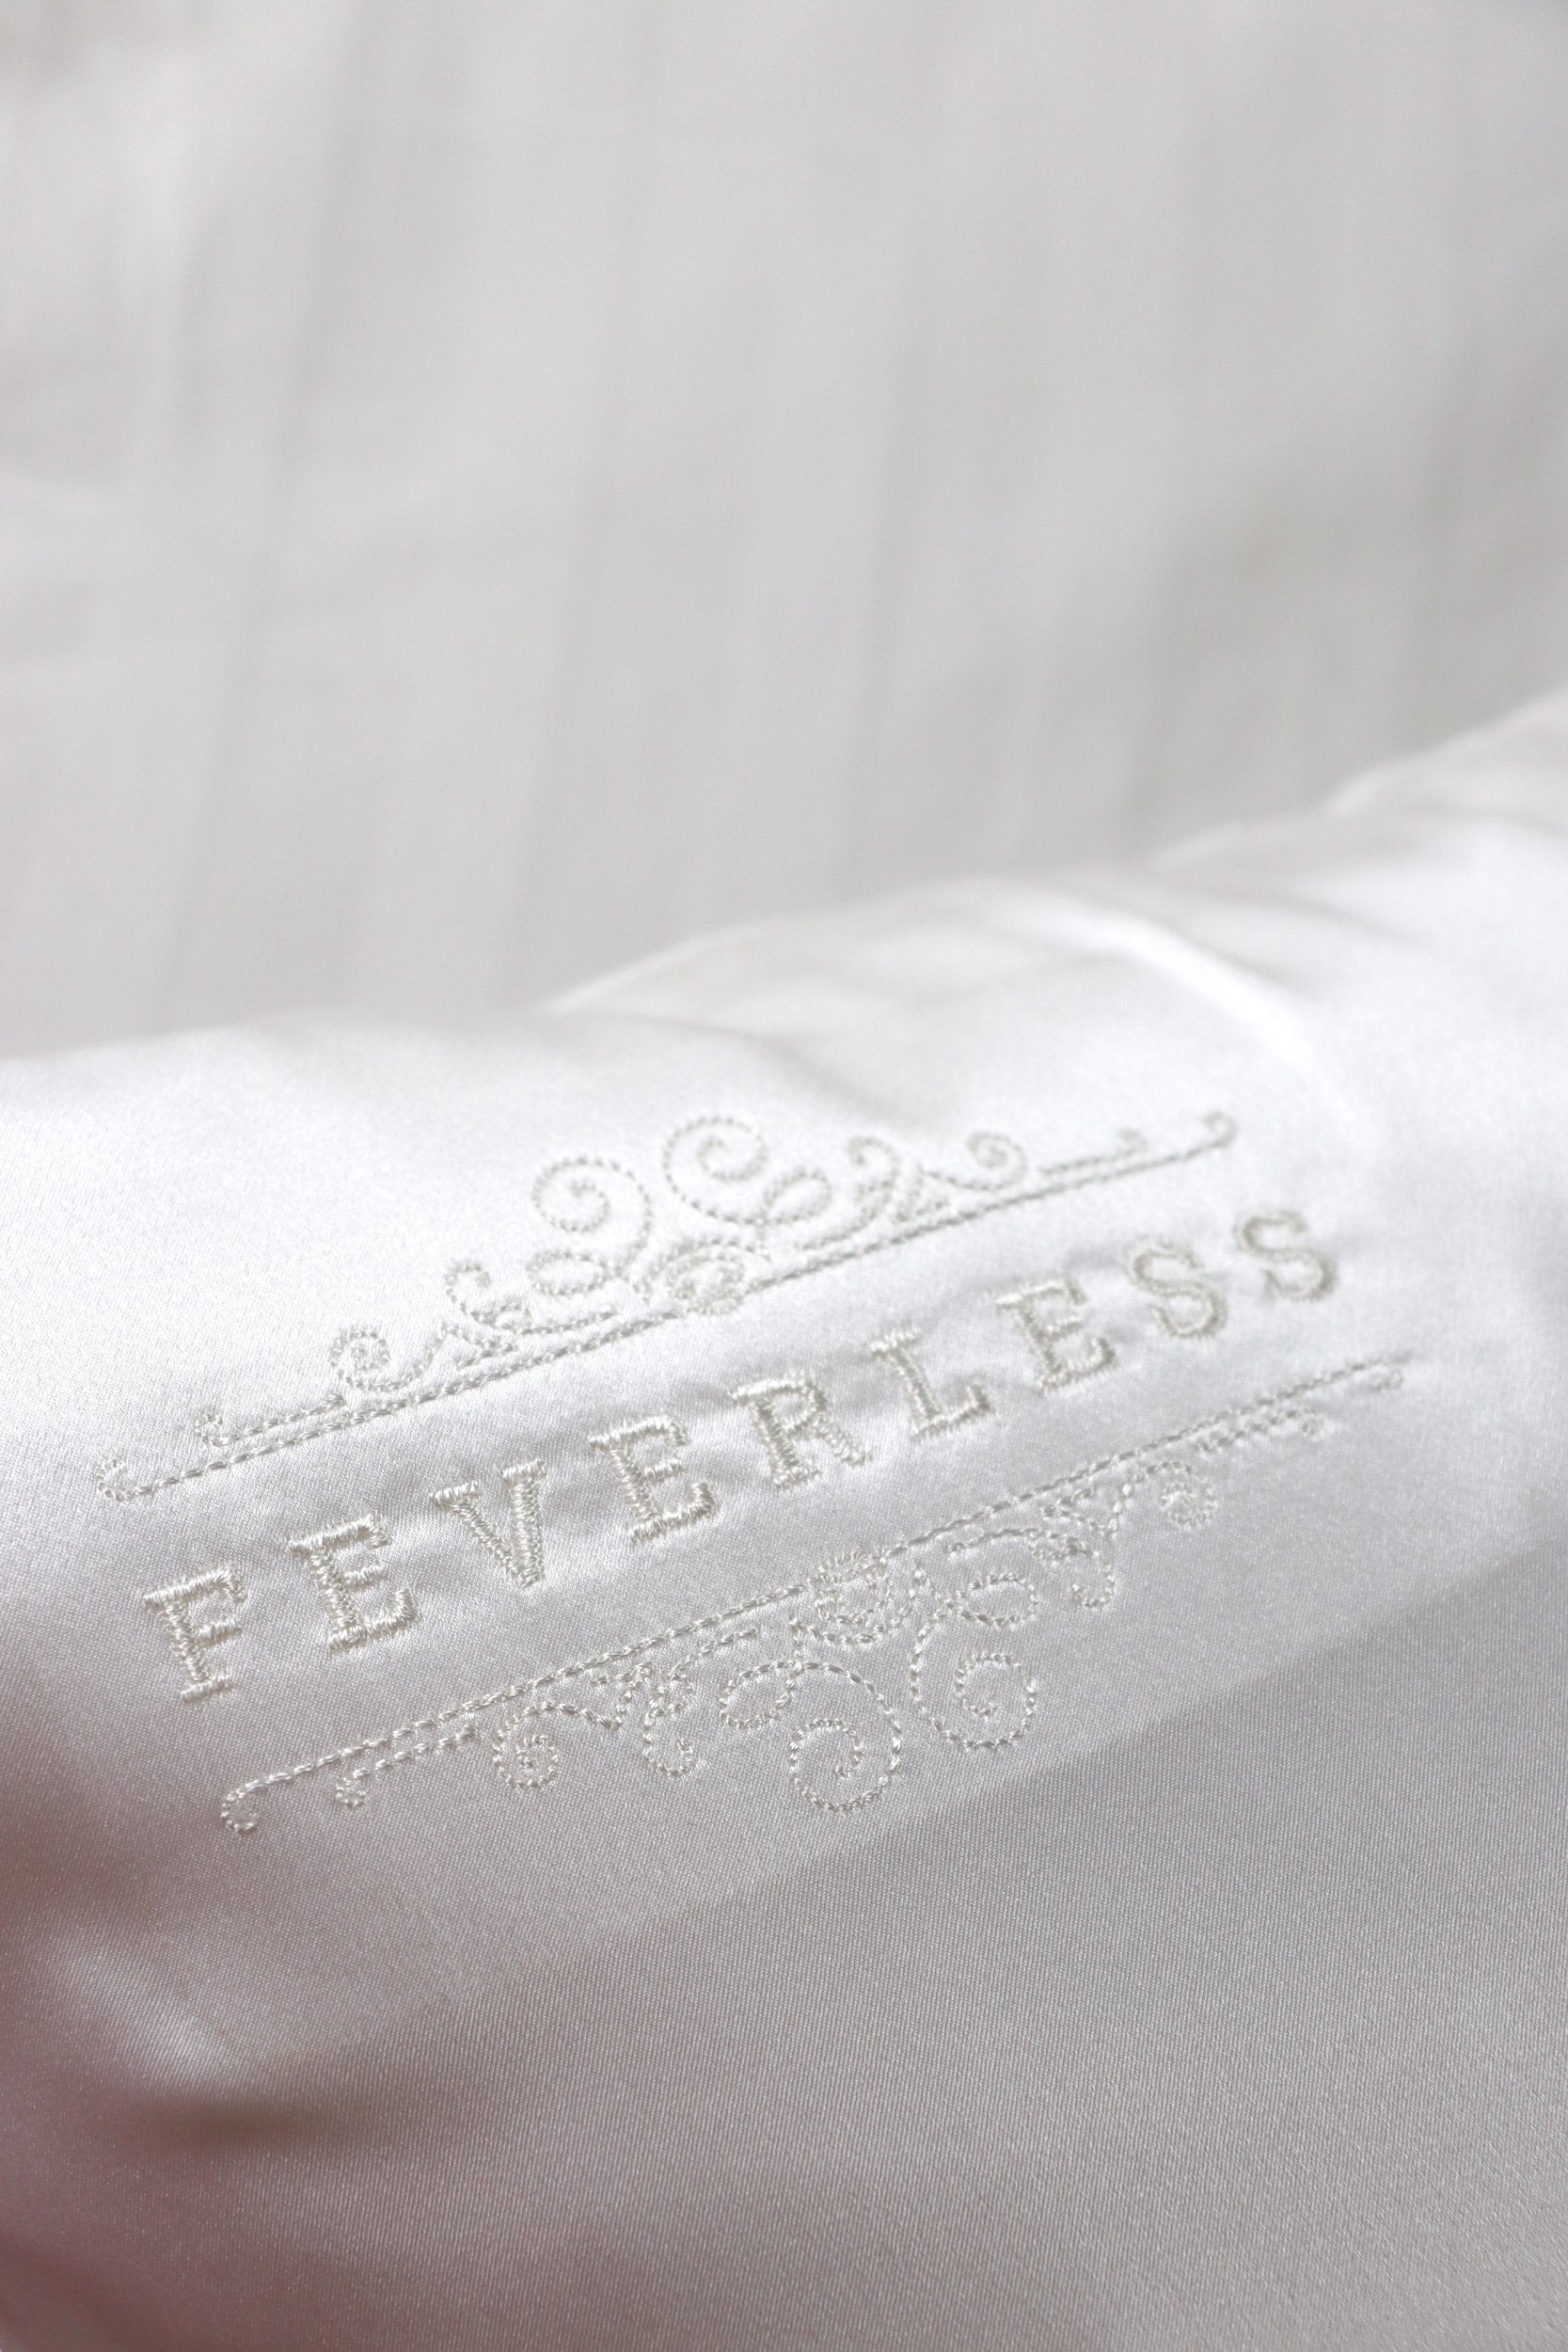 SET of 2 FeverLess Embroidered Pillowcases, made of Natural Mulberry Silk with Hidden White Zipper.